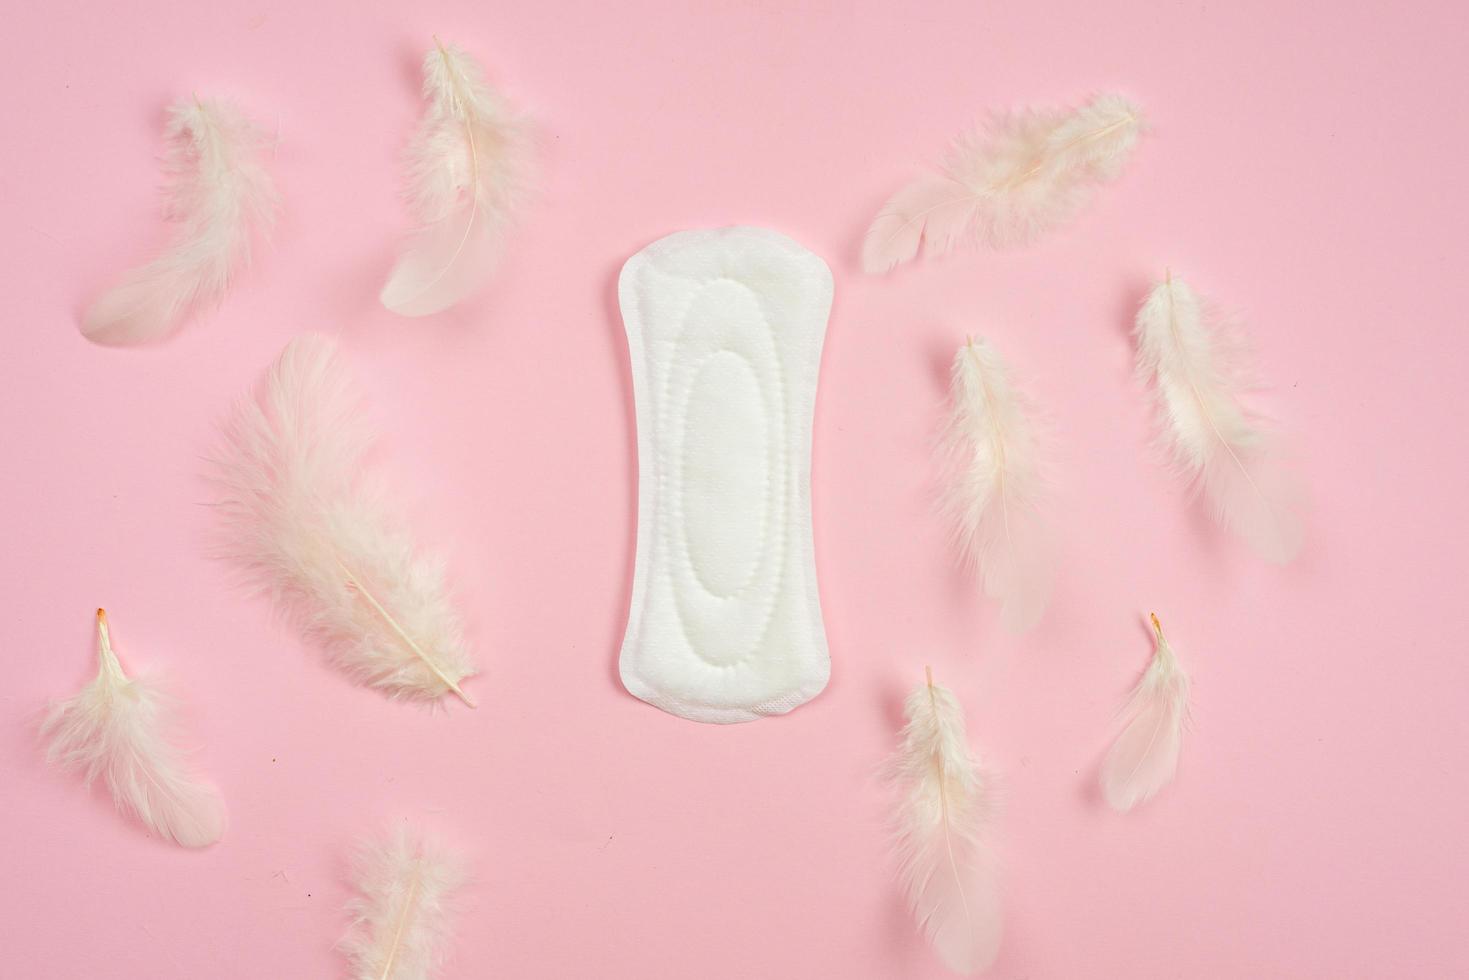 On a pink background, women's daily pads with cotton cover. photo